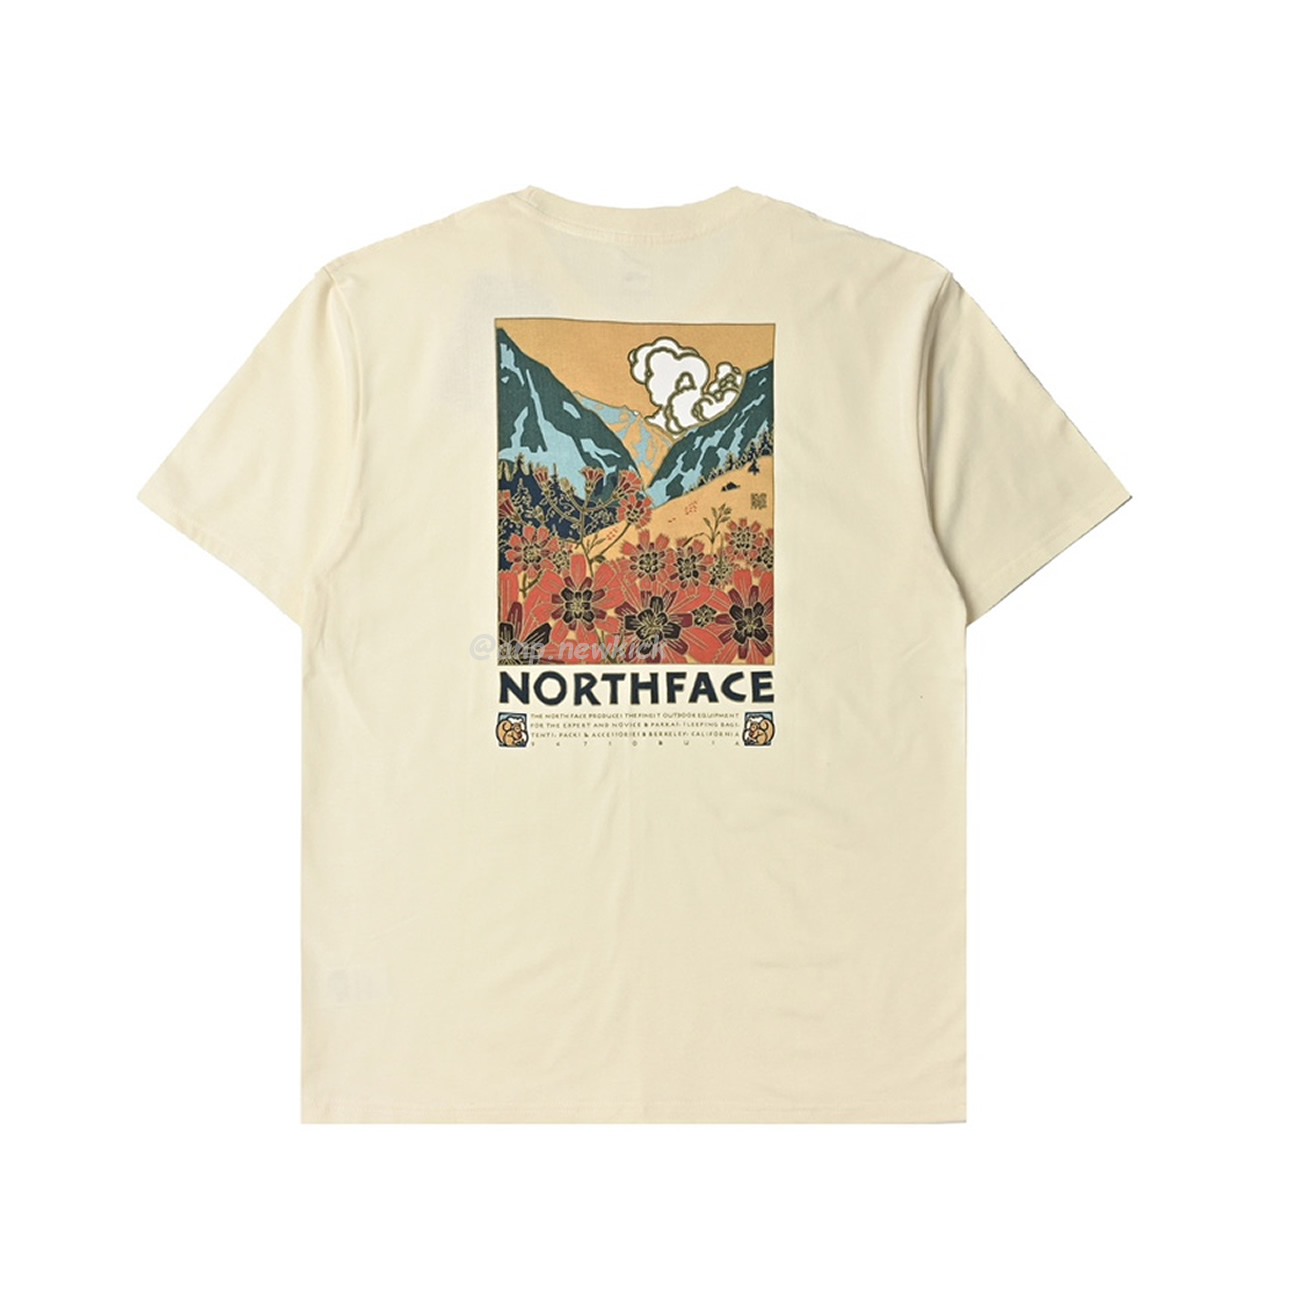 The North Face Tnf Landscape Pattern Short Sleeved T Shirt (4) - newkick.org